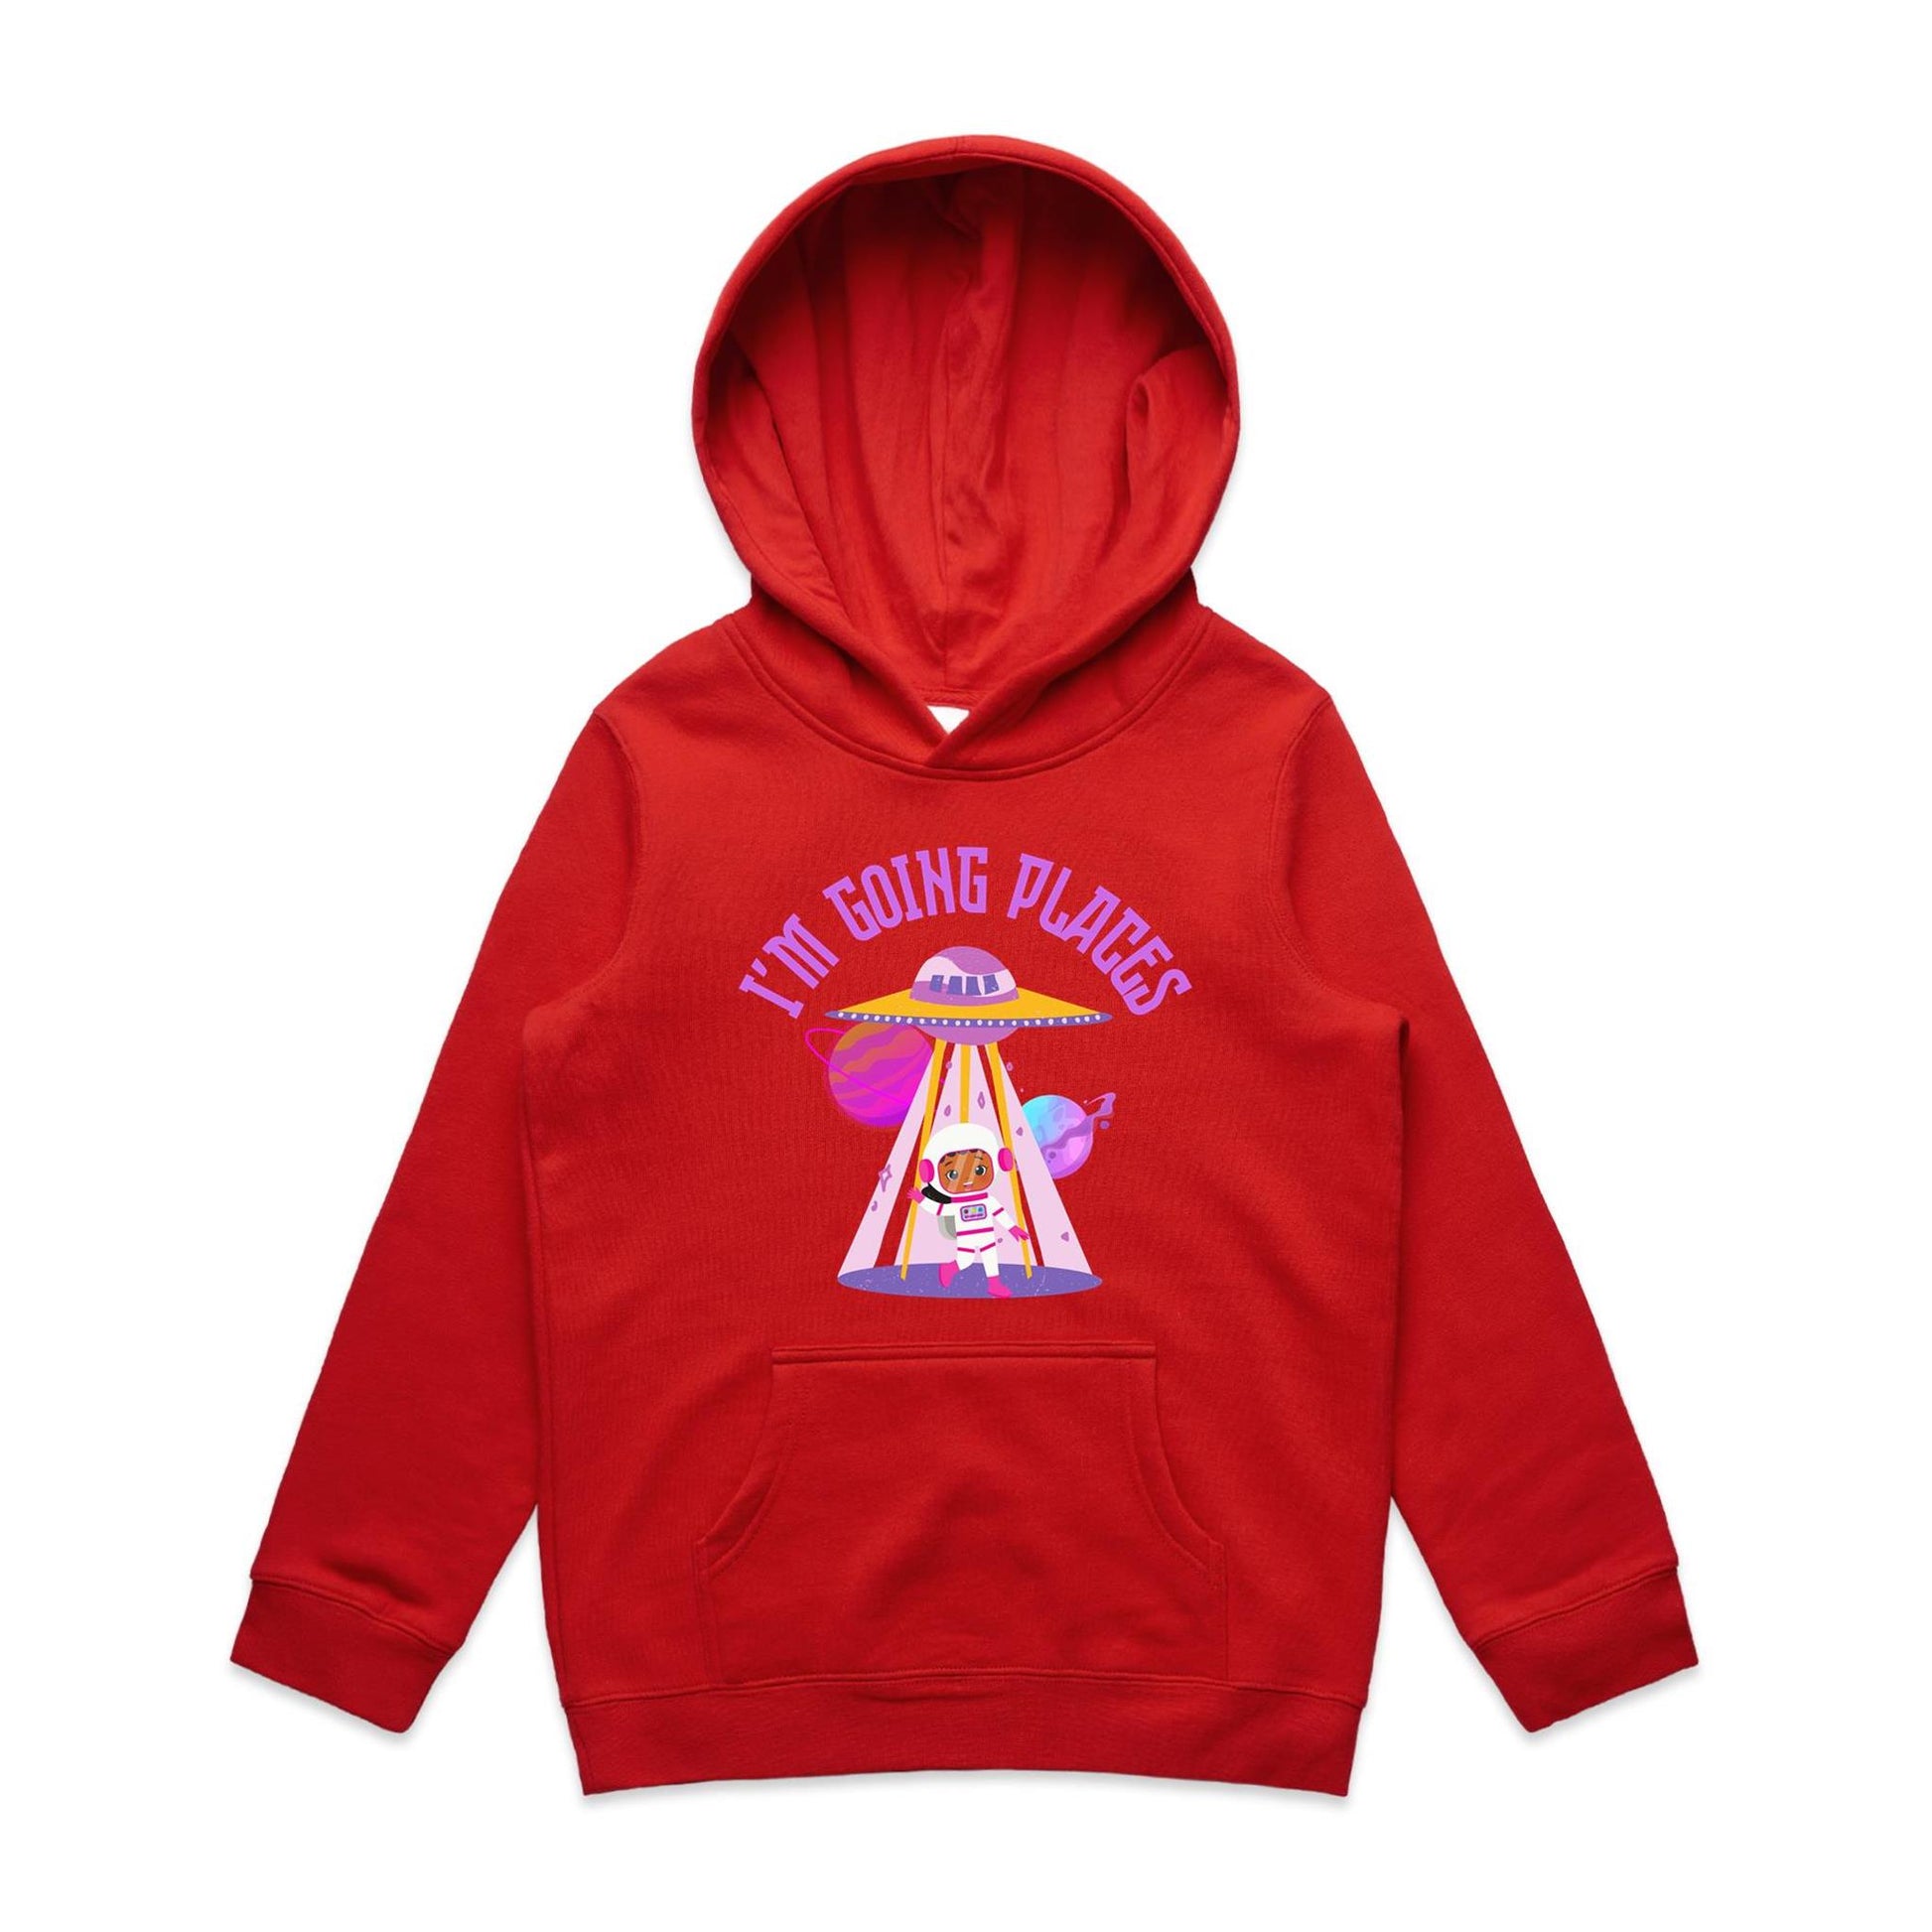 UFO, I'm Going Places - Youth Supply Hood Red Kids Hoodie Sci Fi